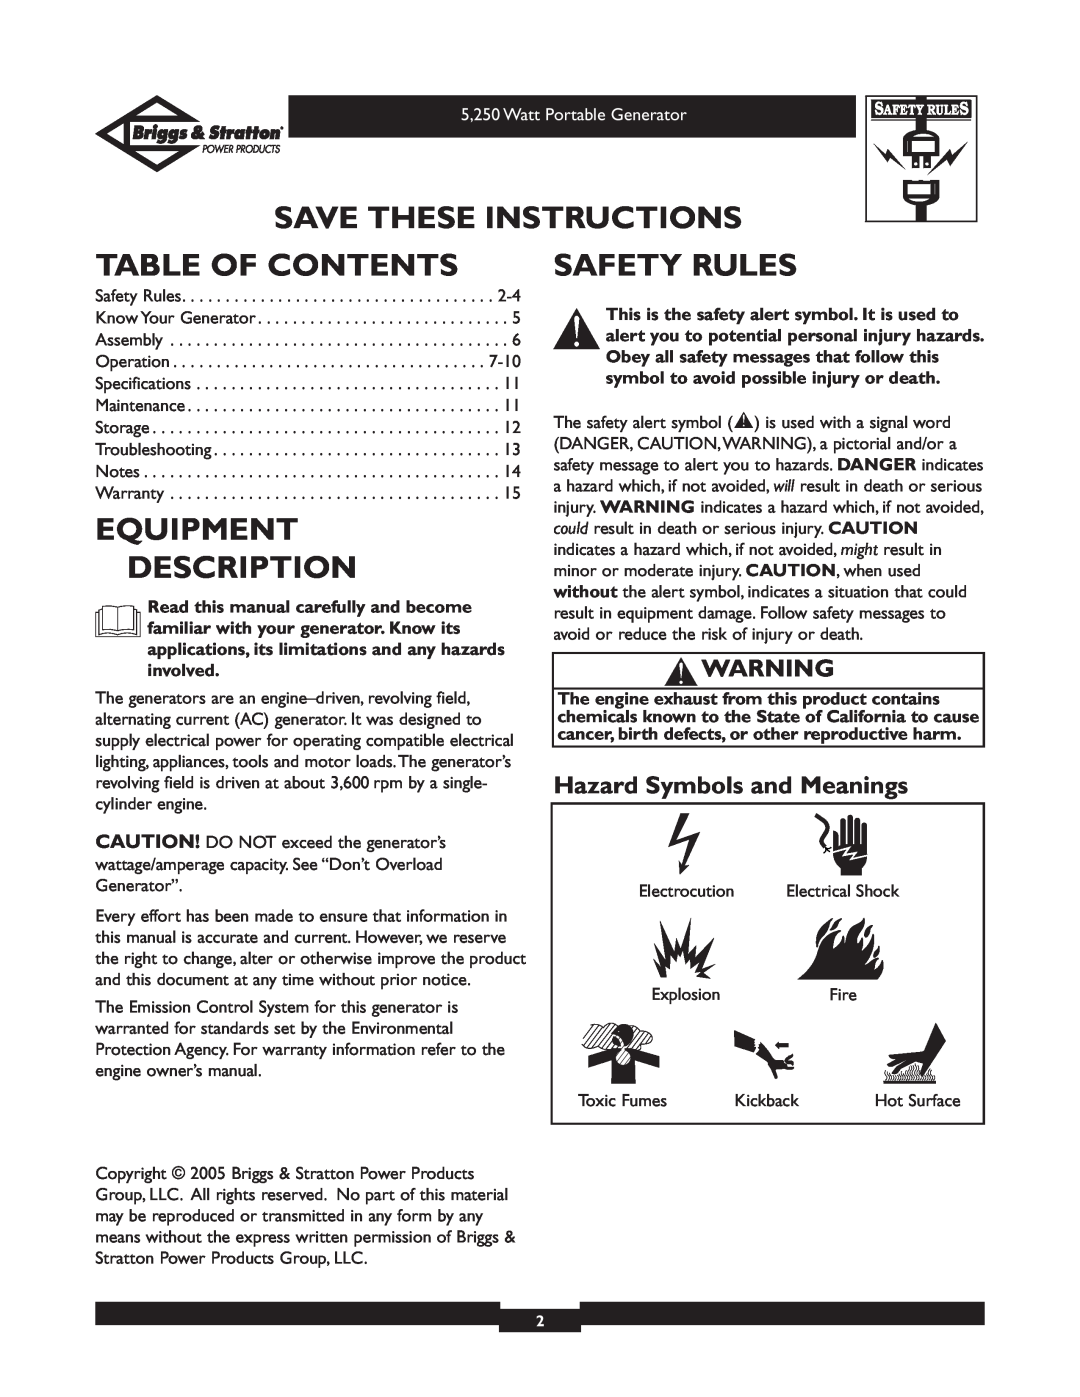 Briggs & Stratton 30204 owner manual Save These Instructions, Table Of Contents, Equipment Description, Safety Rules 